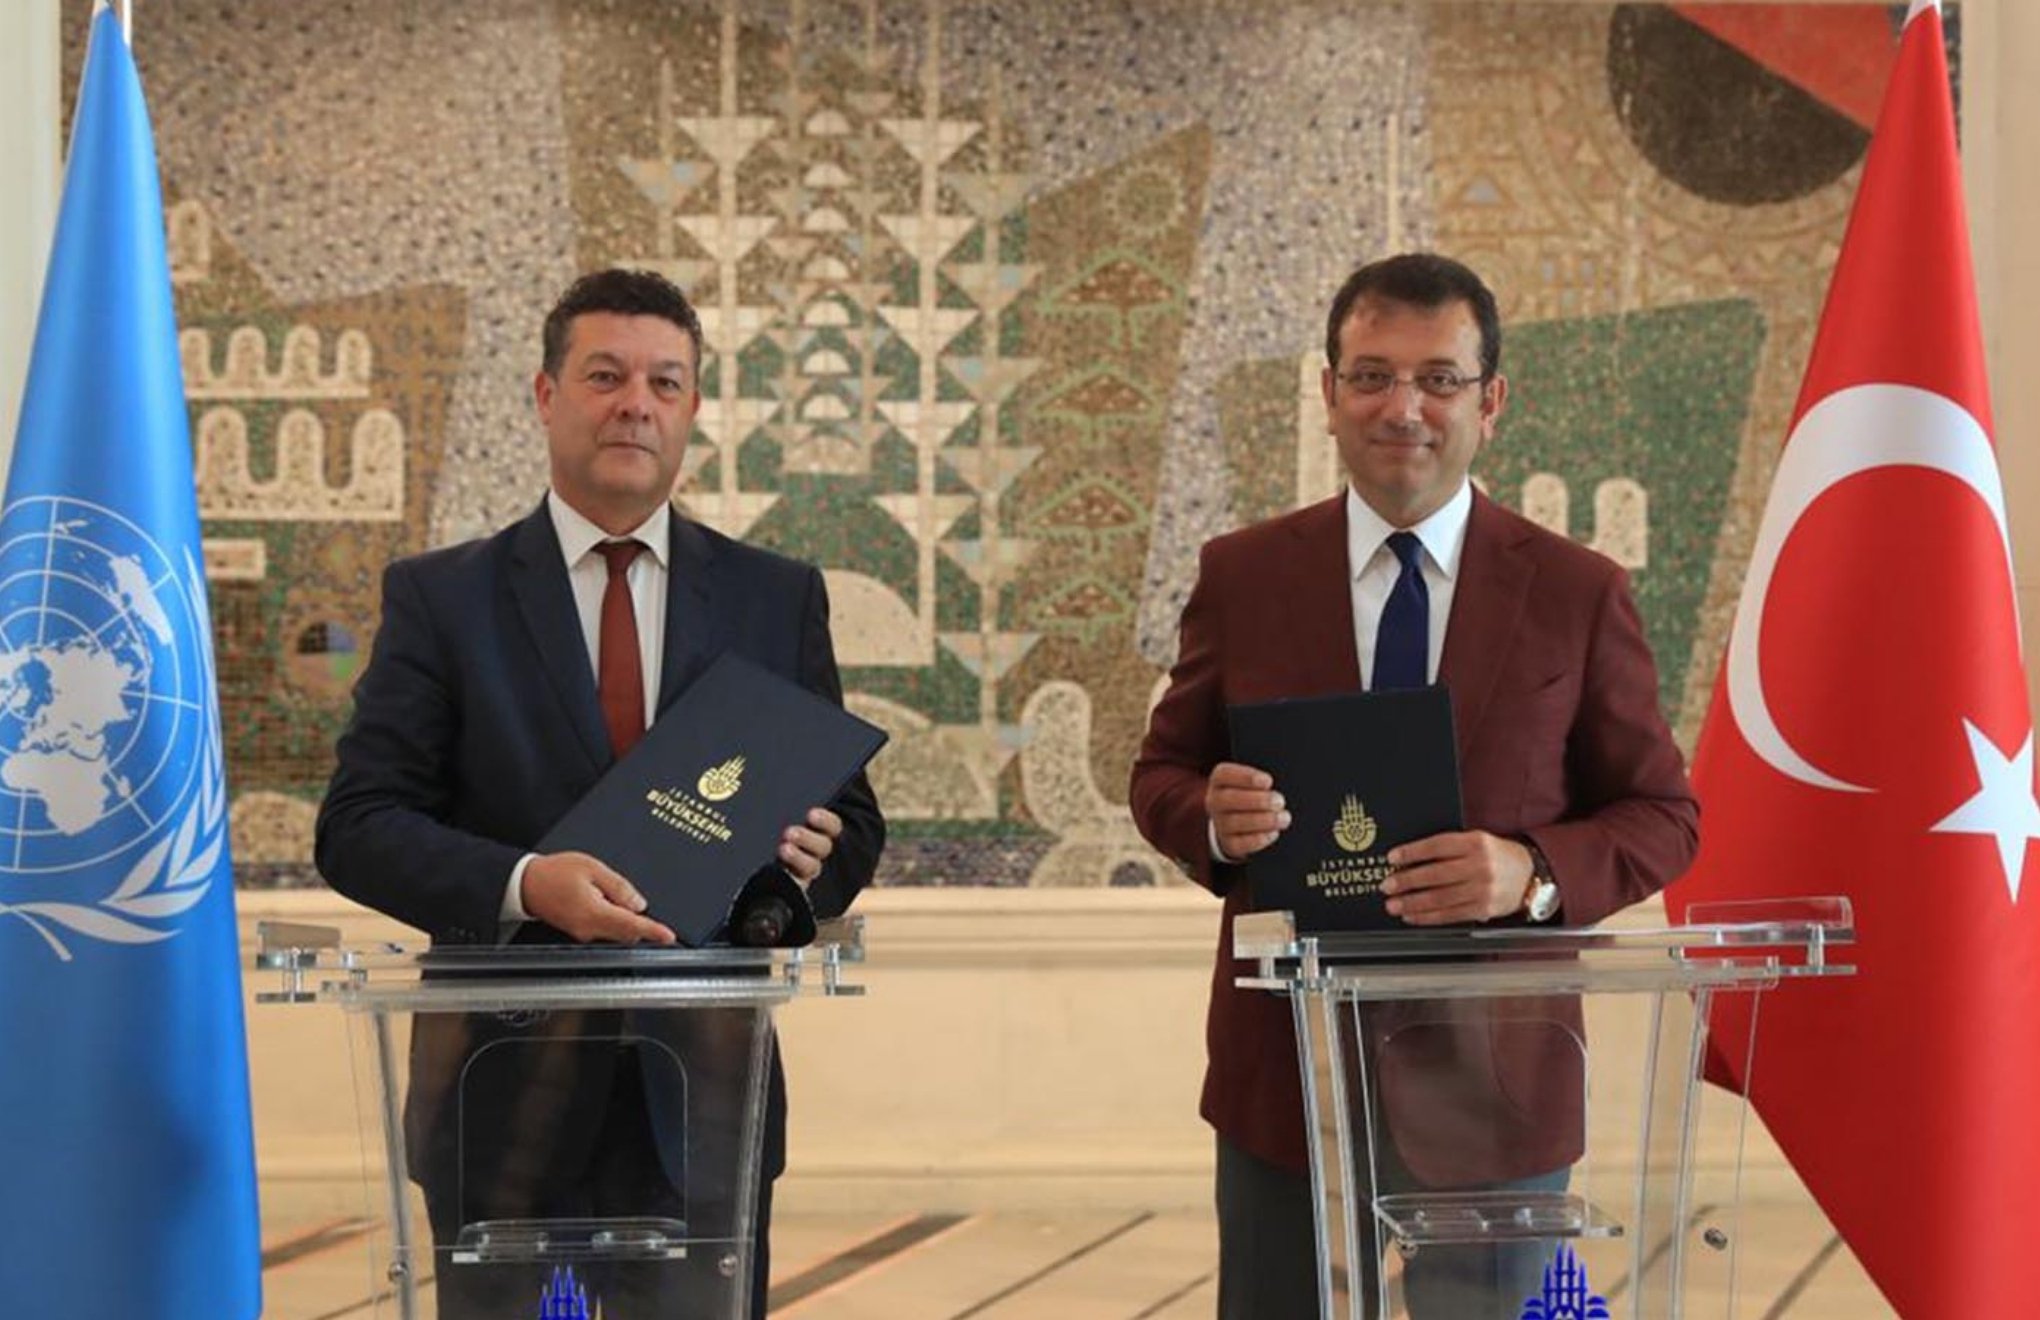 İstanbul Municipality, UNHCR sign agreement on refugees